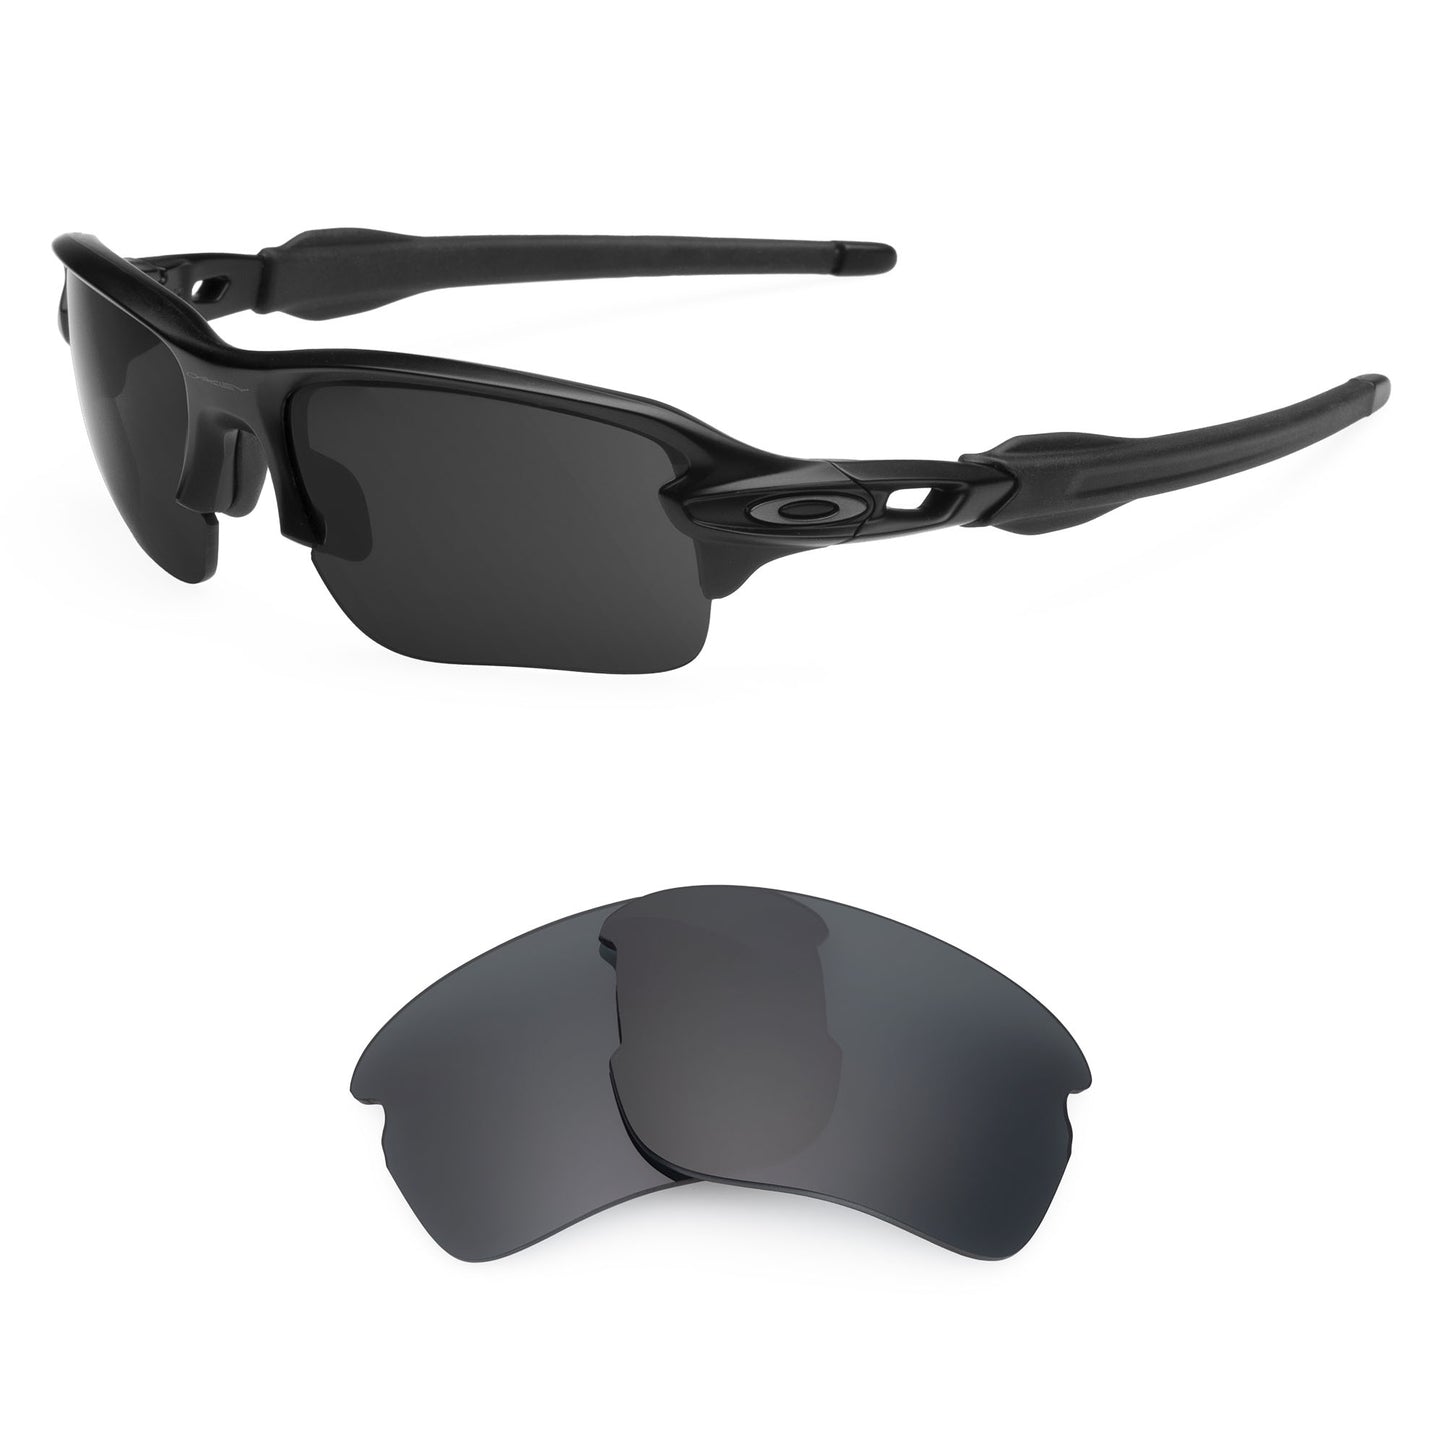 Oakley Flak XS (Exclusive Shape) sunglasses with replacement lenses